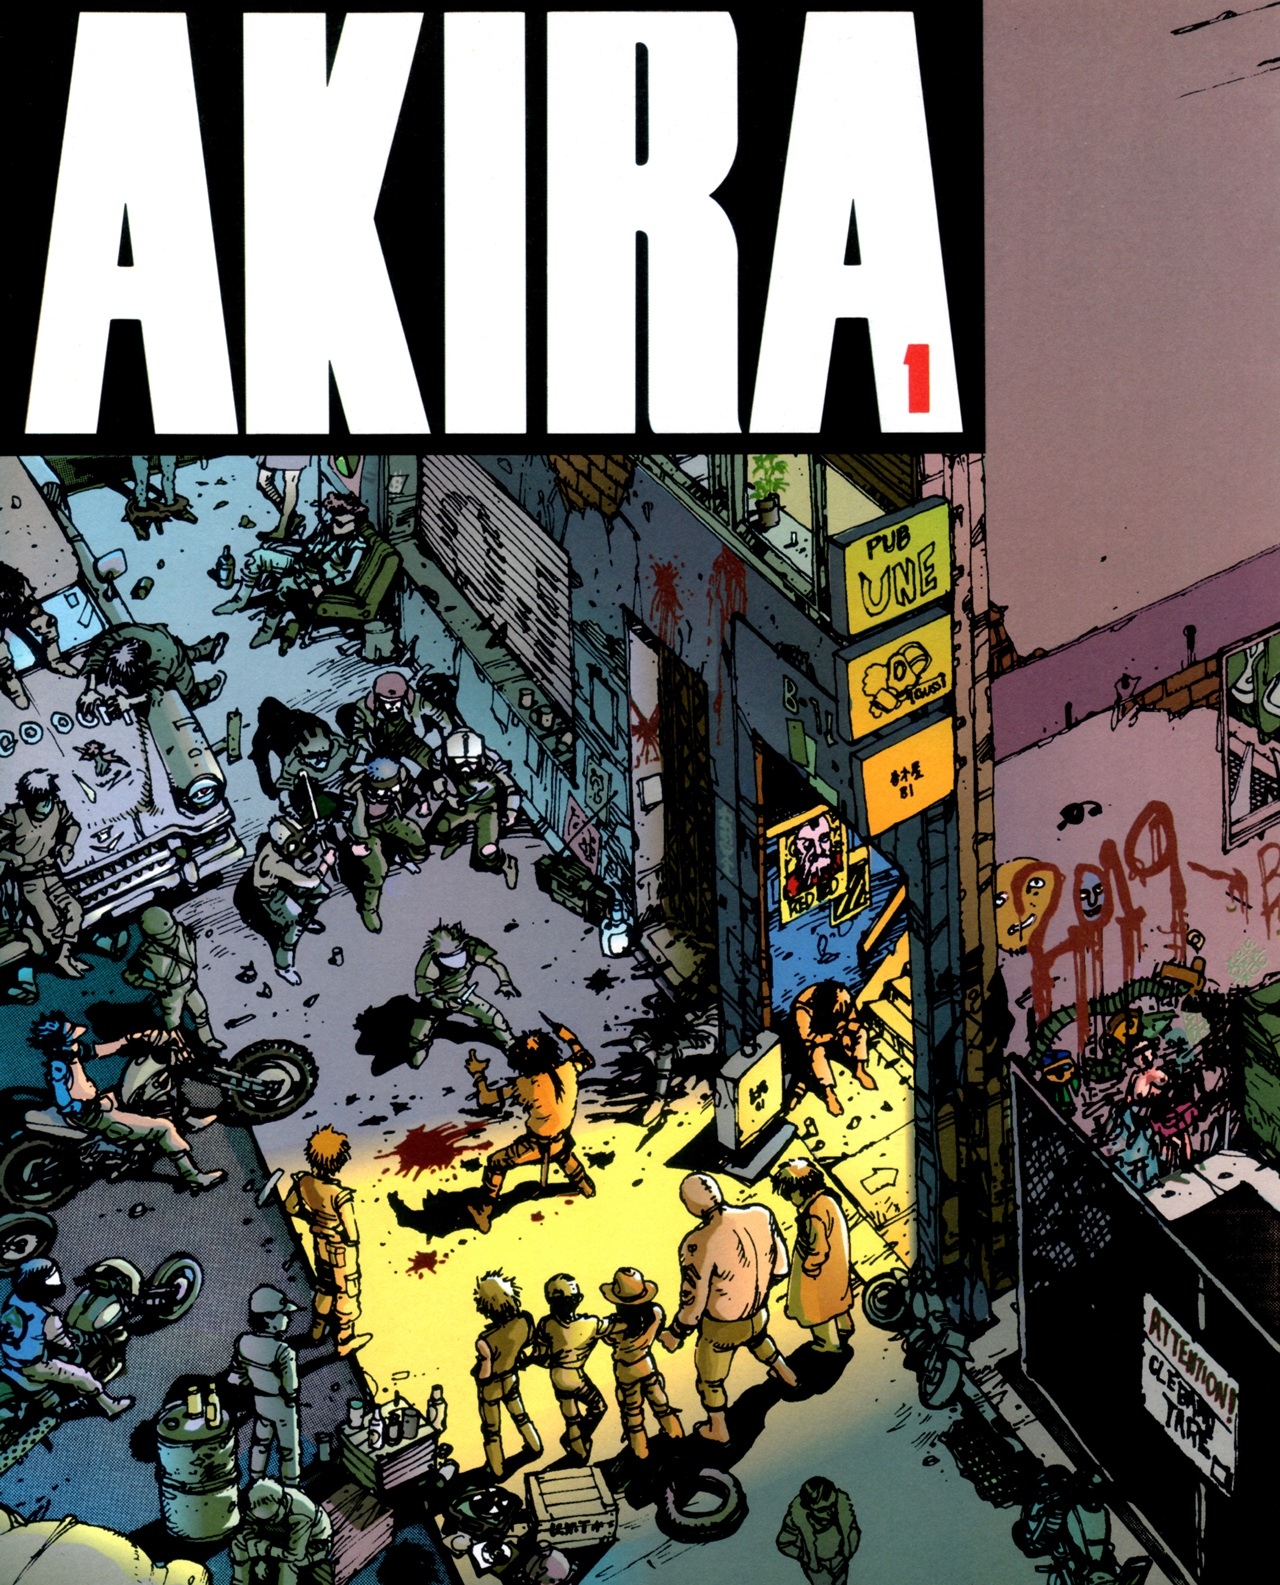 Akira club - The memory of Akira lives on in our hearts! 42